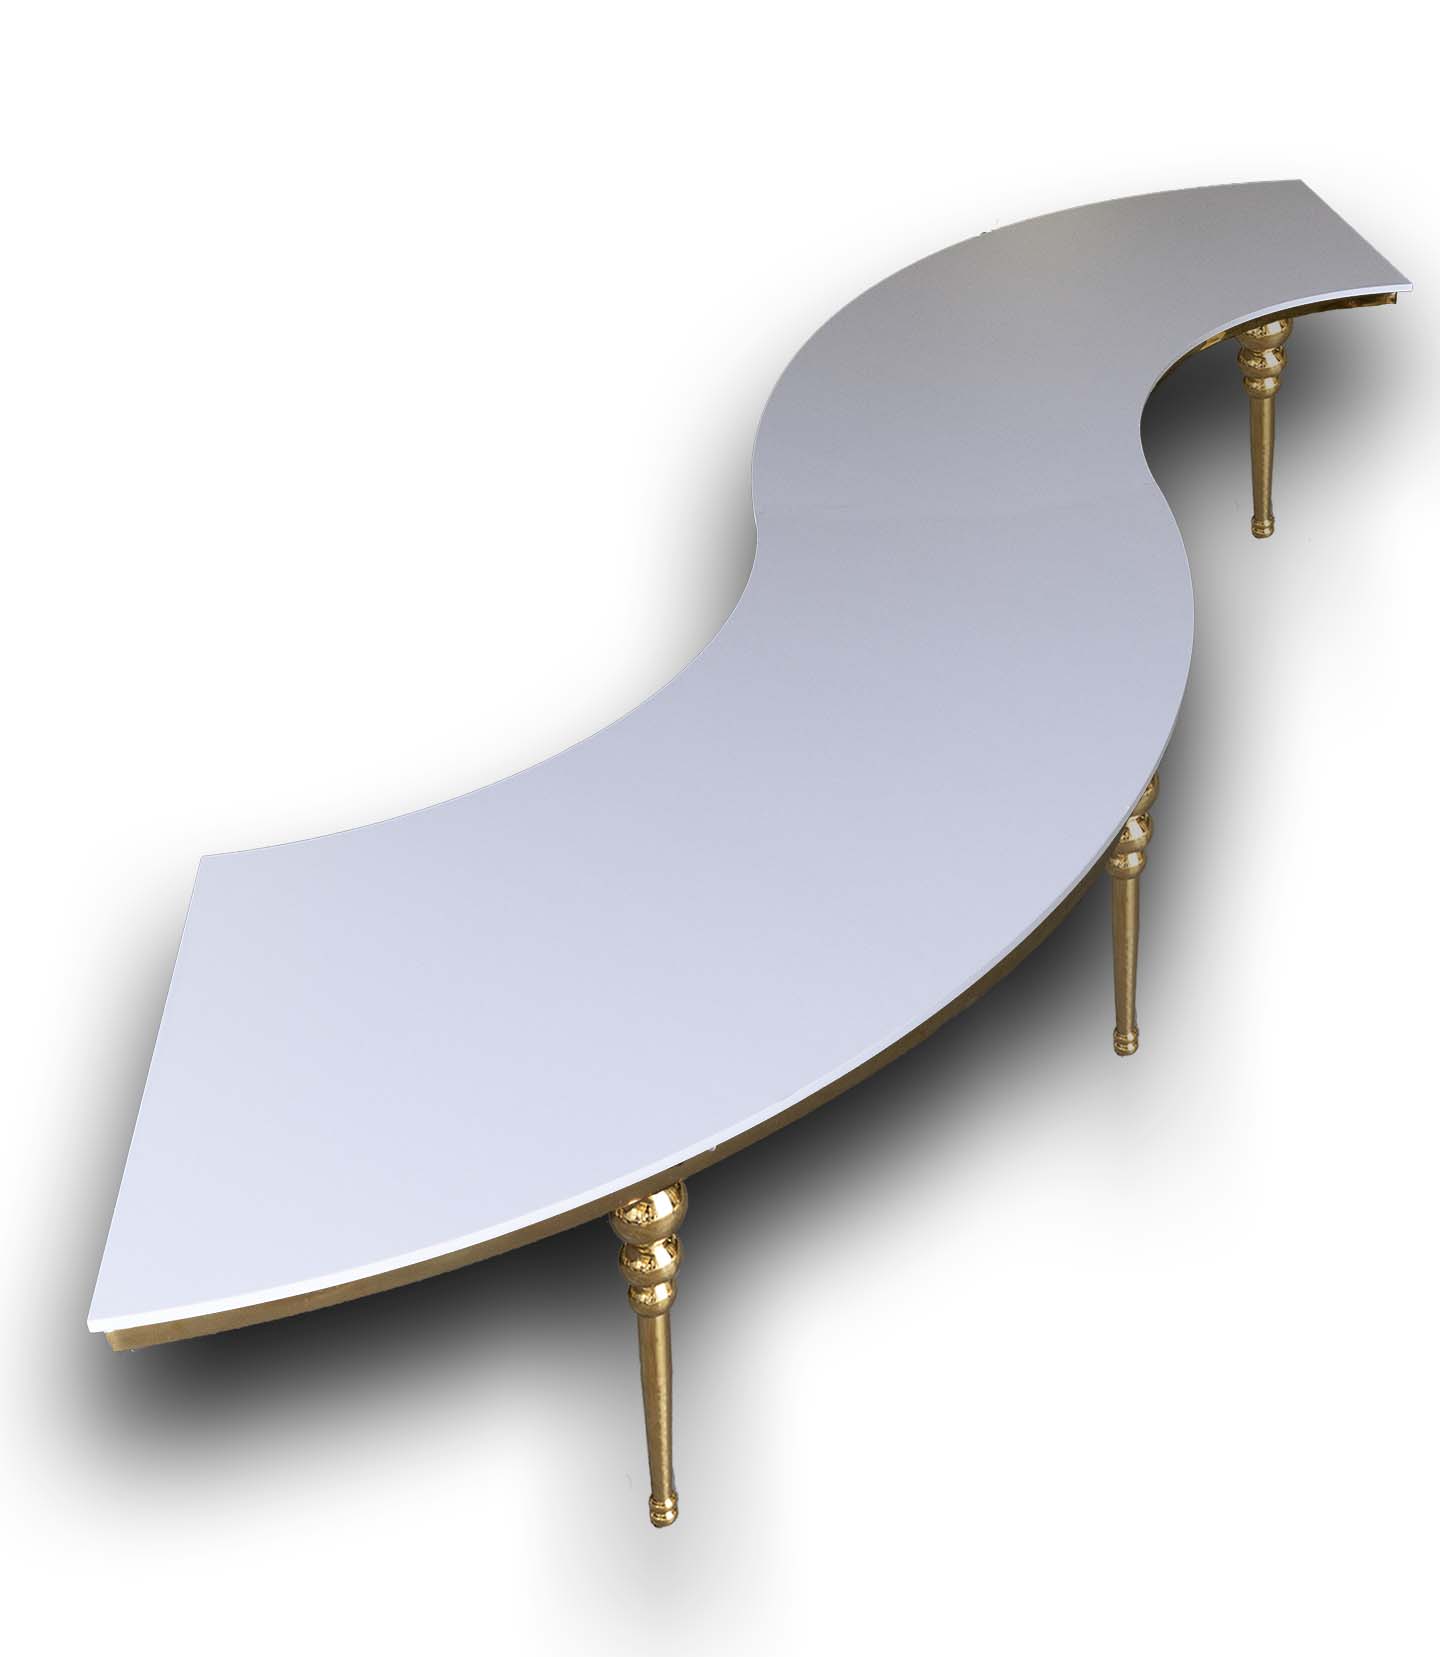 Class Event Rentals Kleopatra Serpentine Table in white with gold legs arranged in wave shape